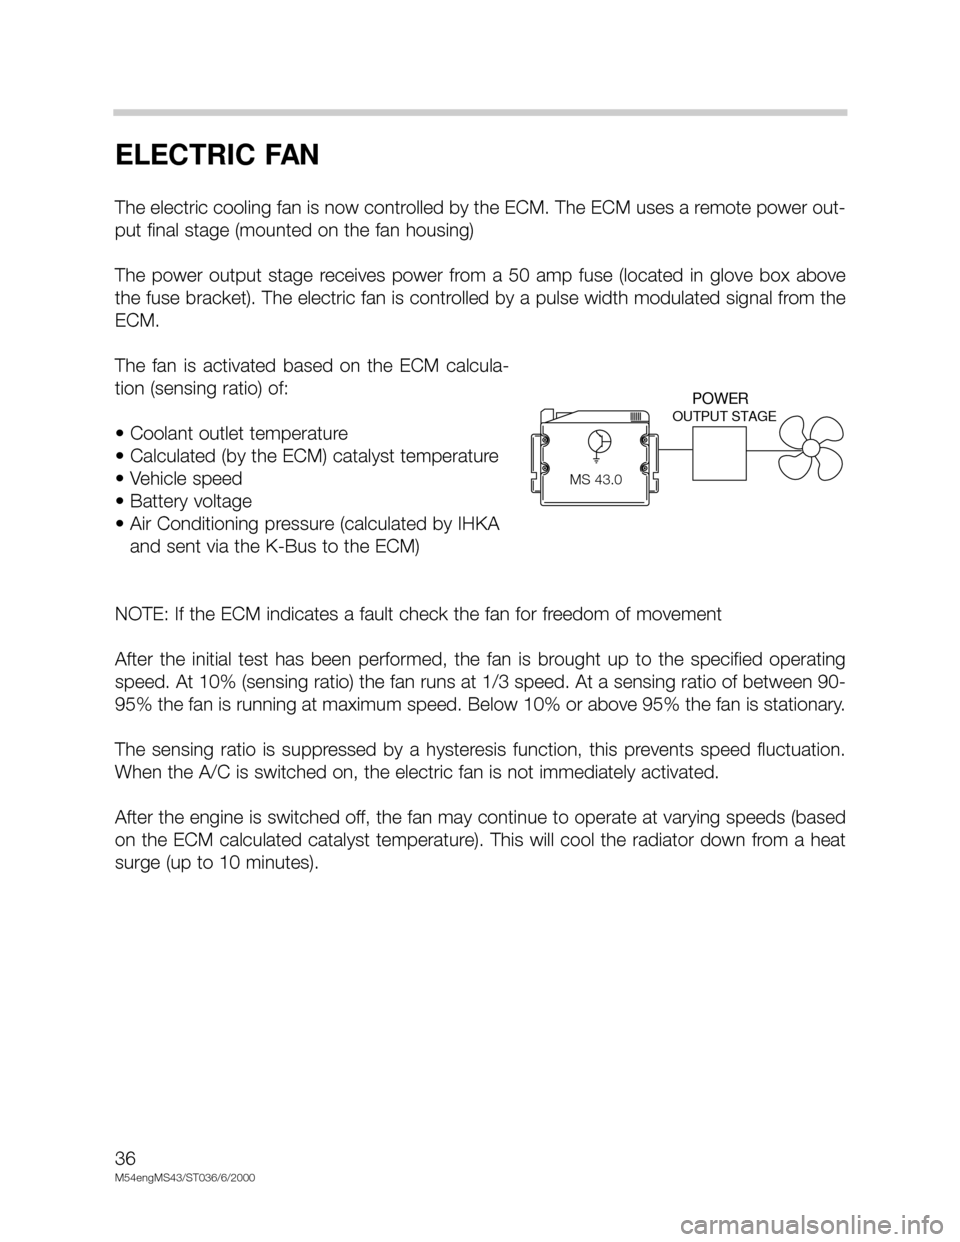 BMW X5 1999 E53 M54 Engine Workshop Manual 36
M54engMS43/ST036/6/2000
ELECTRIC FAN
The electric cooling fan is now controlled by the ECM. The ECM uses a remote power out-
put final stage (mounted on the fan housing)
The  power  output  stage  